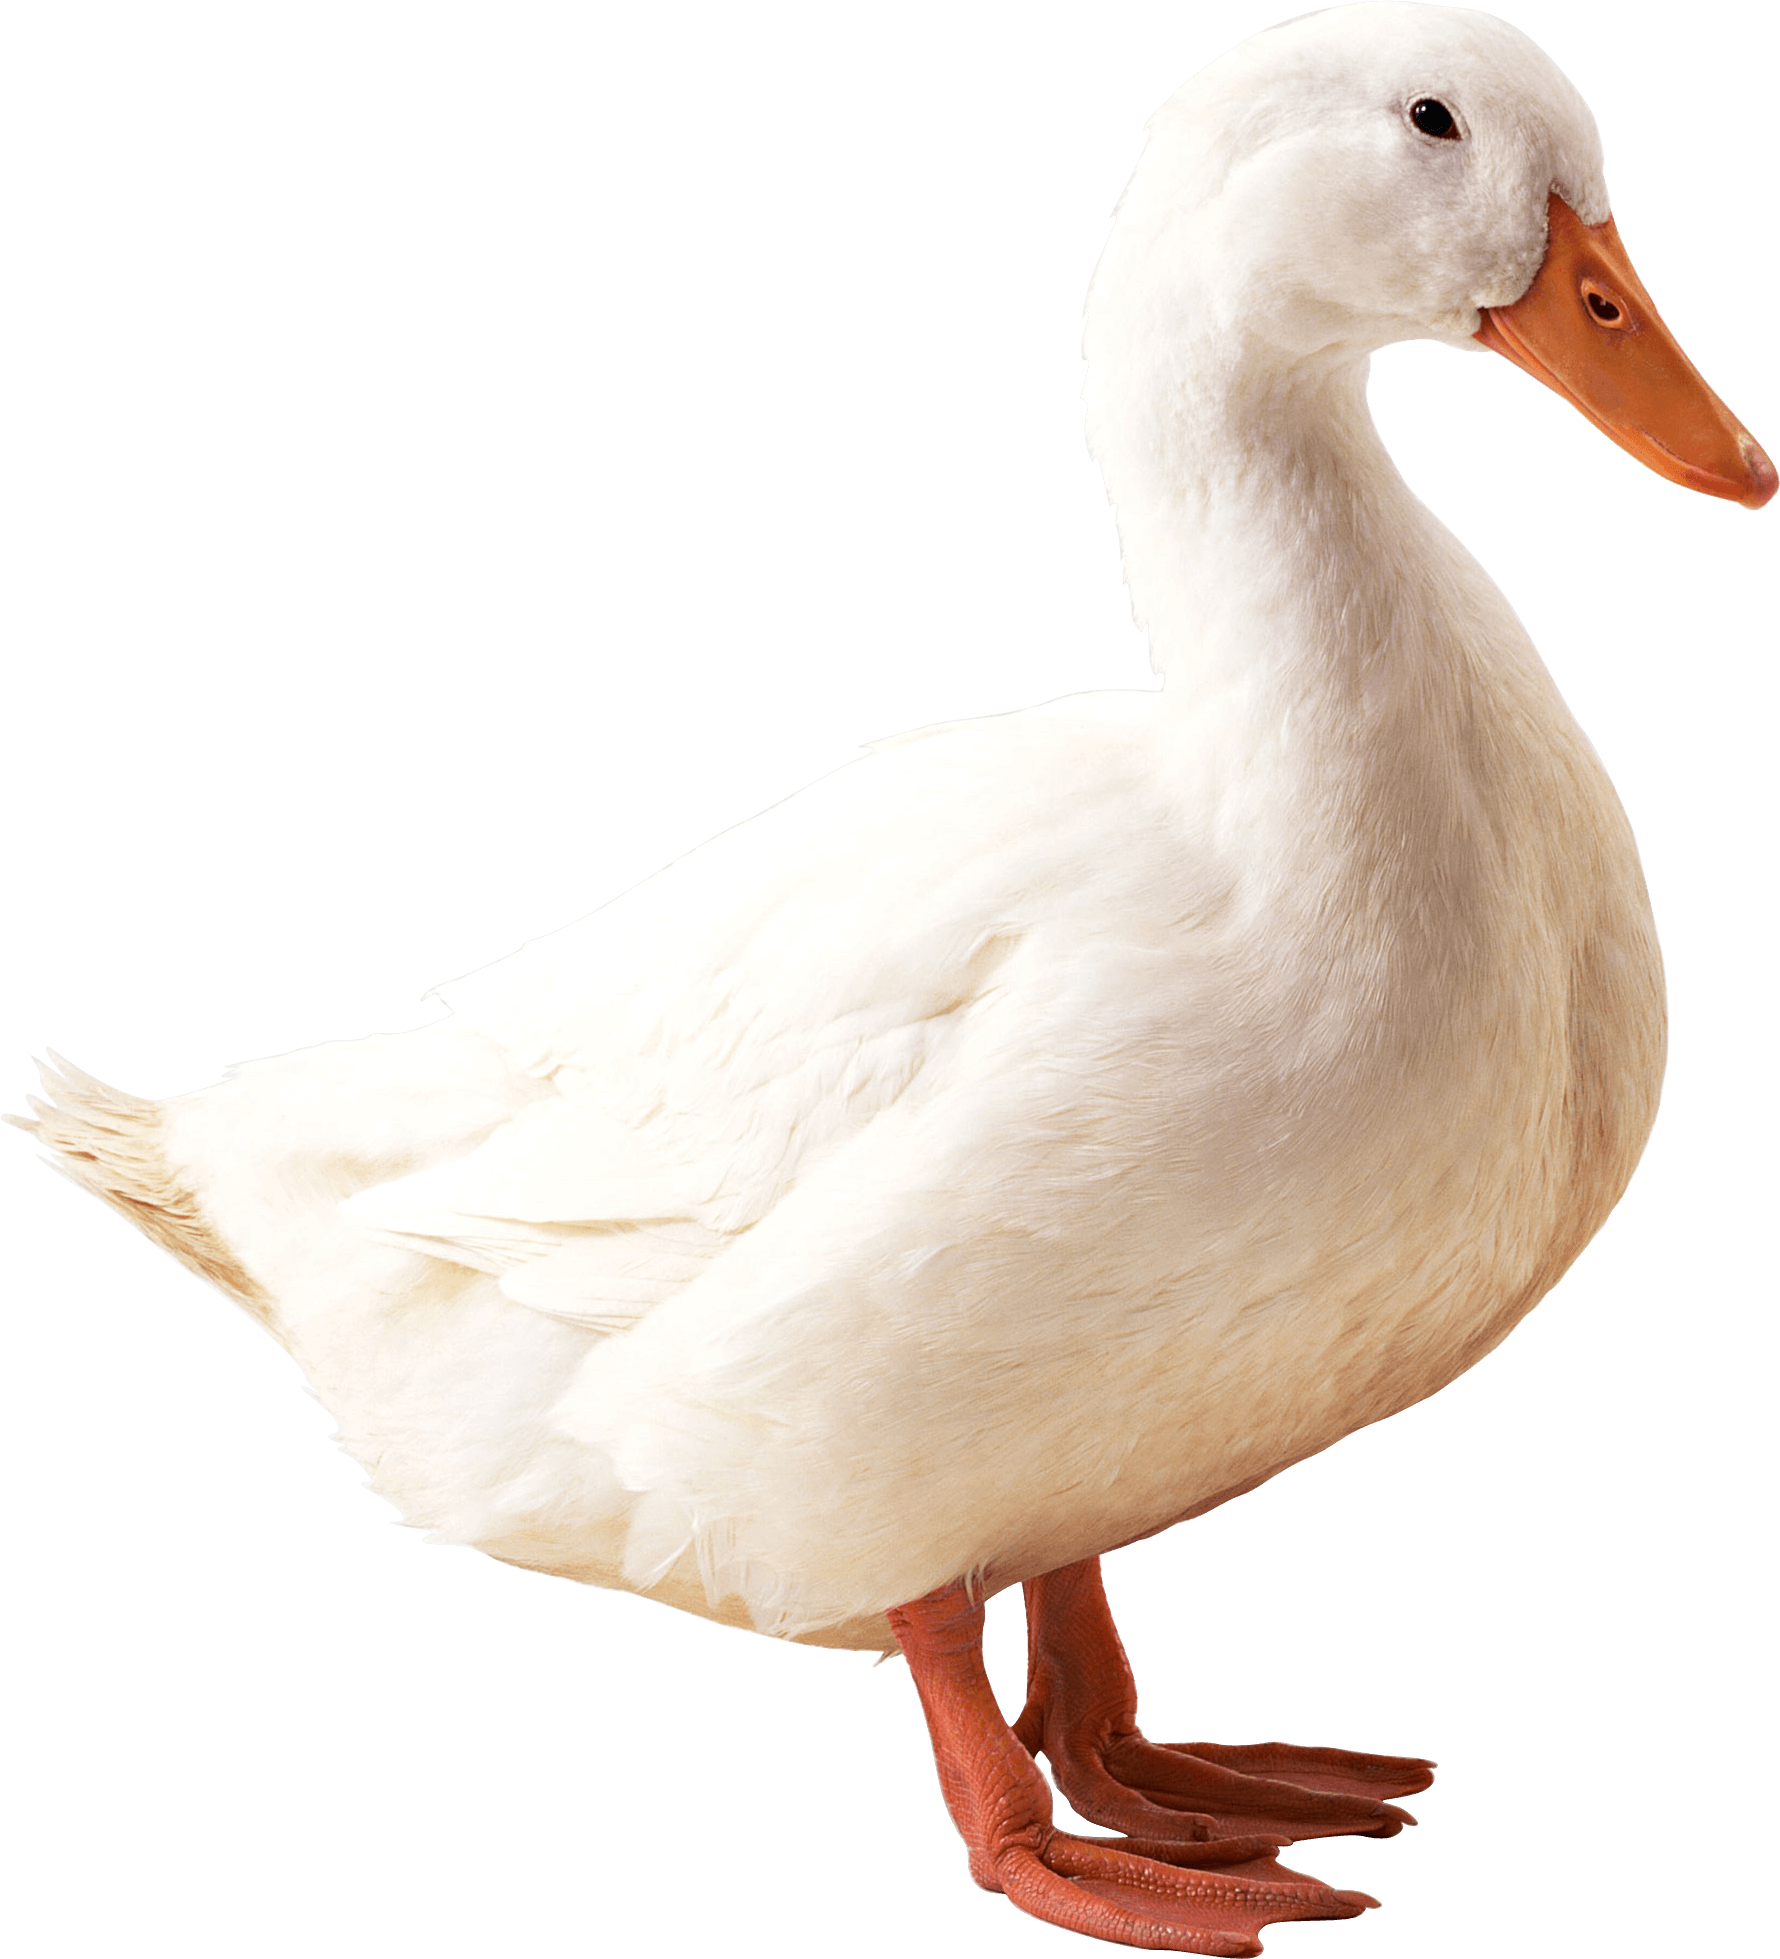 download white duck png image png image pngimg #19414